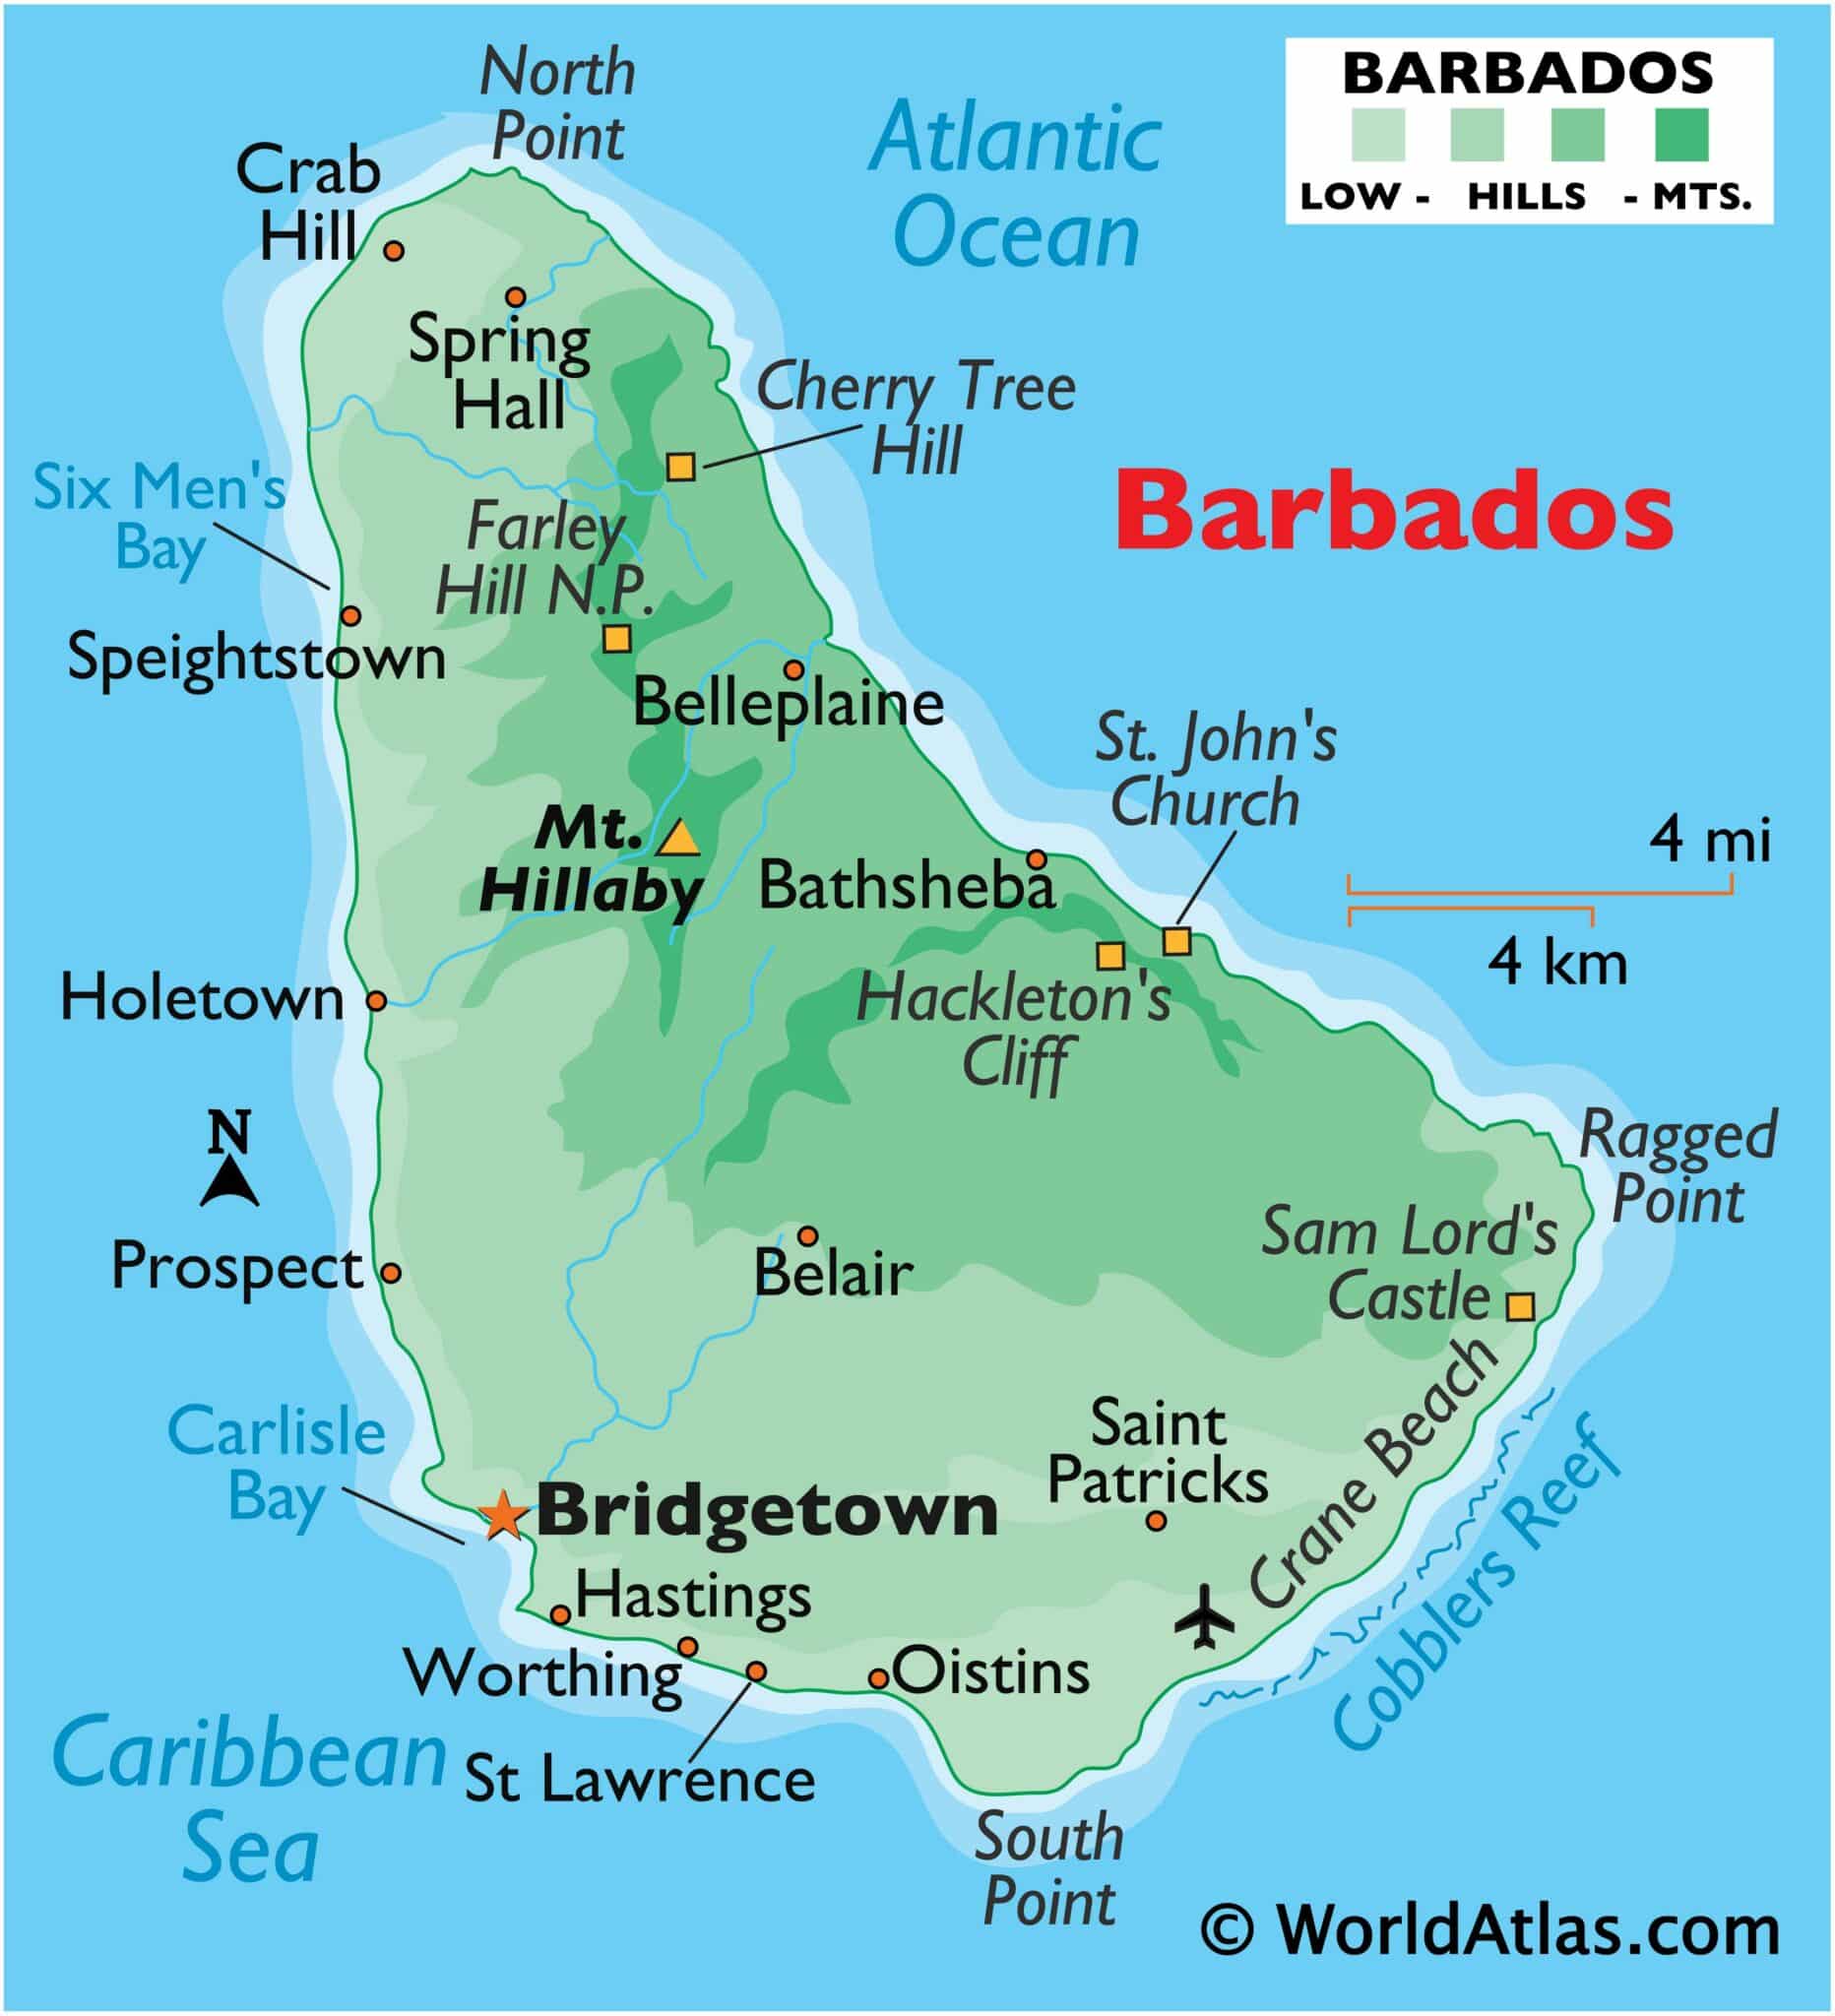 How To Buy A Property In Barbados